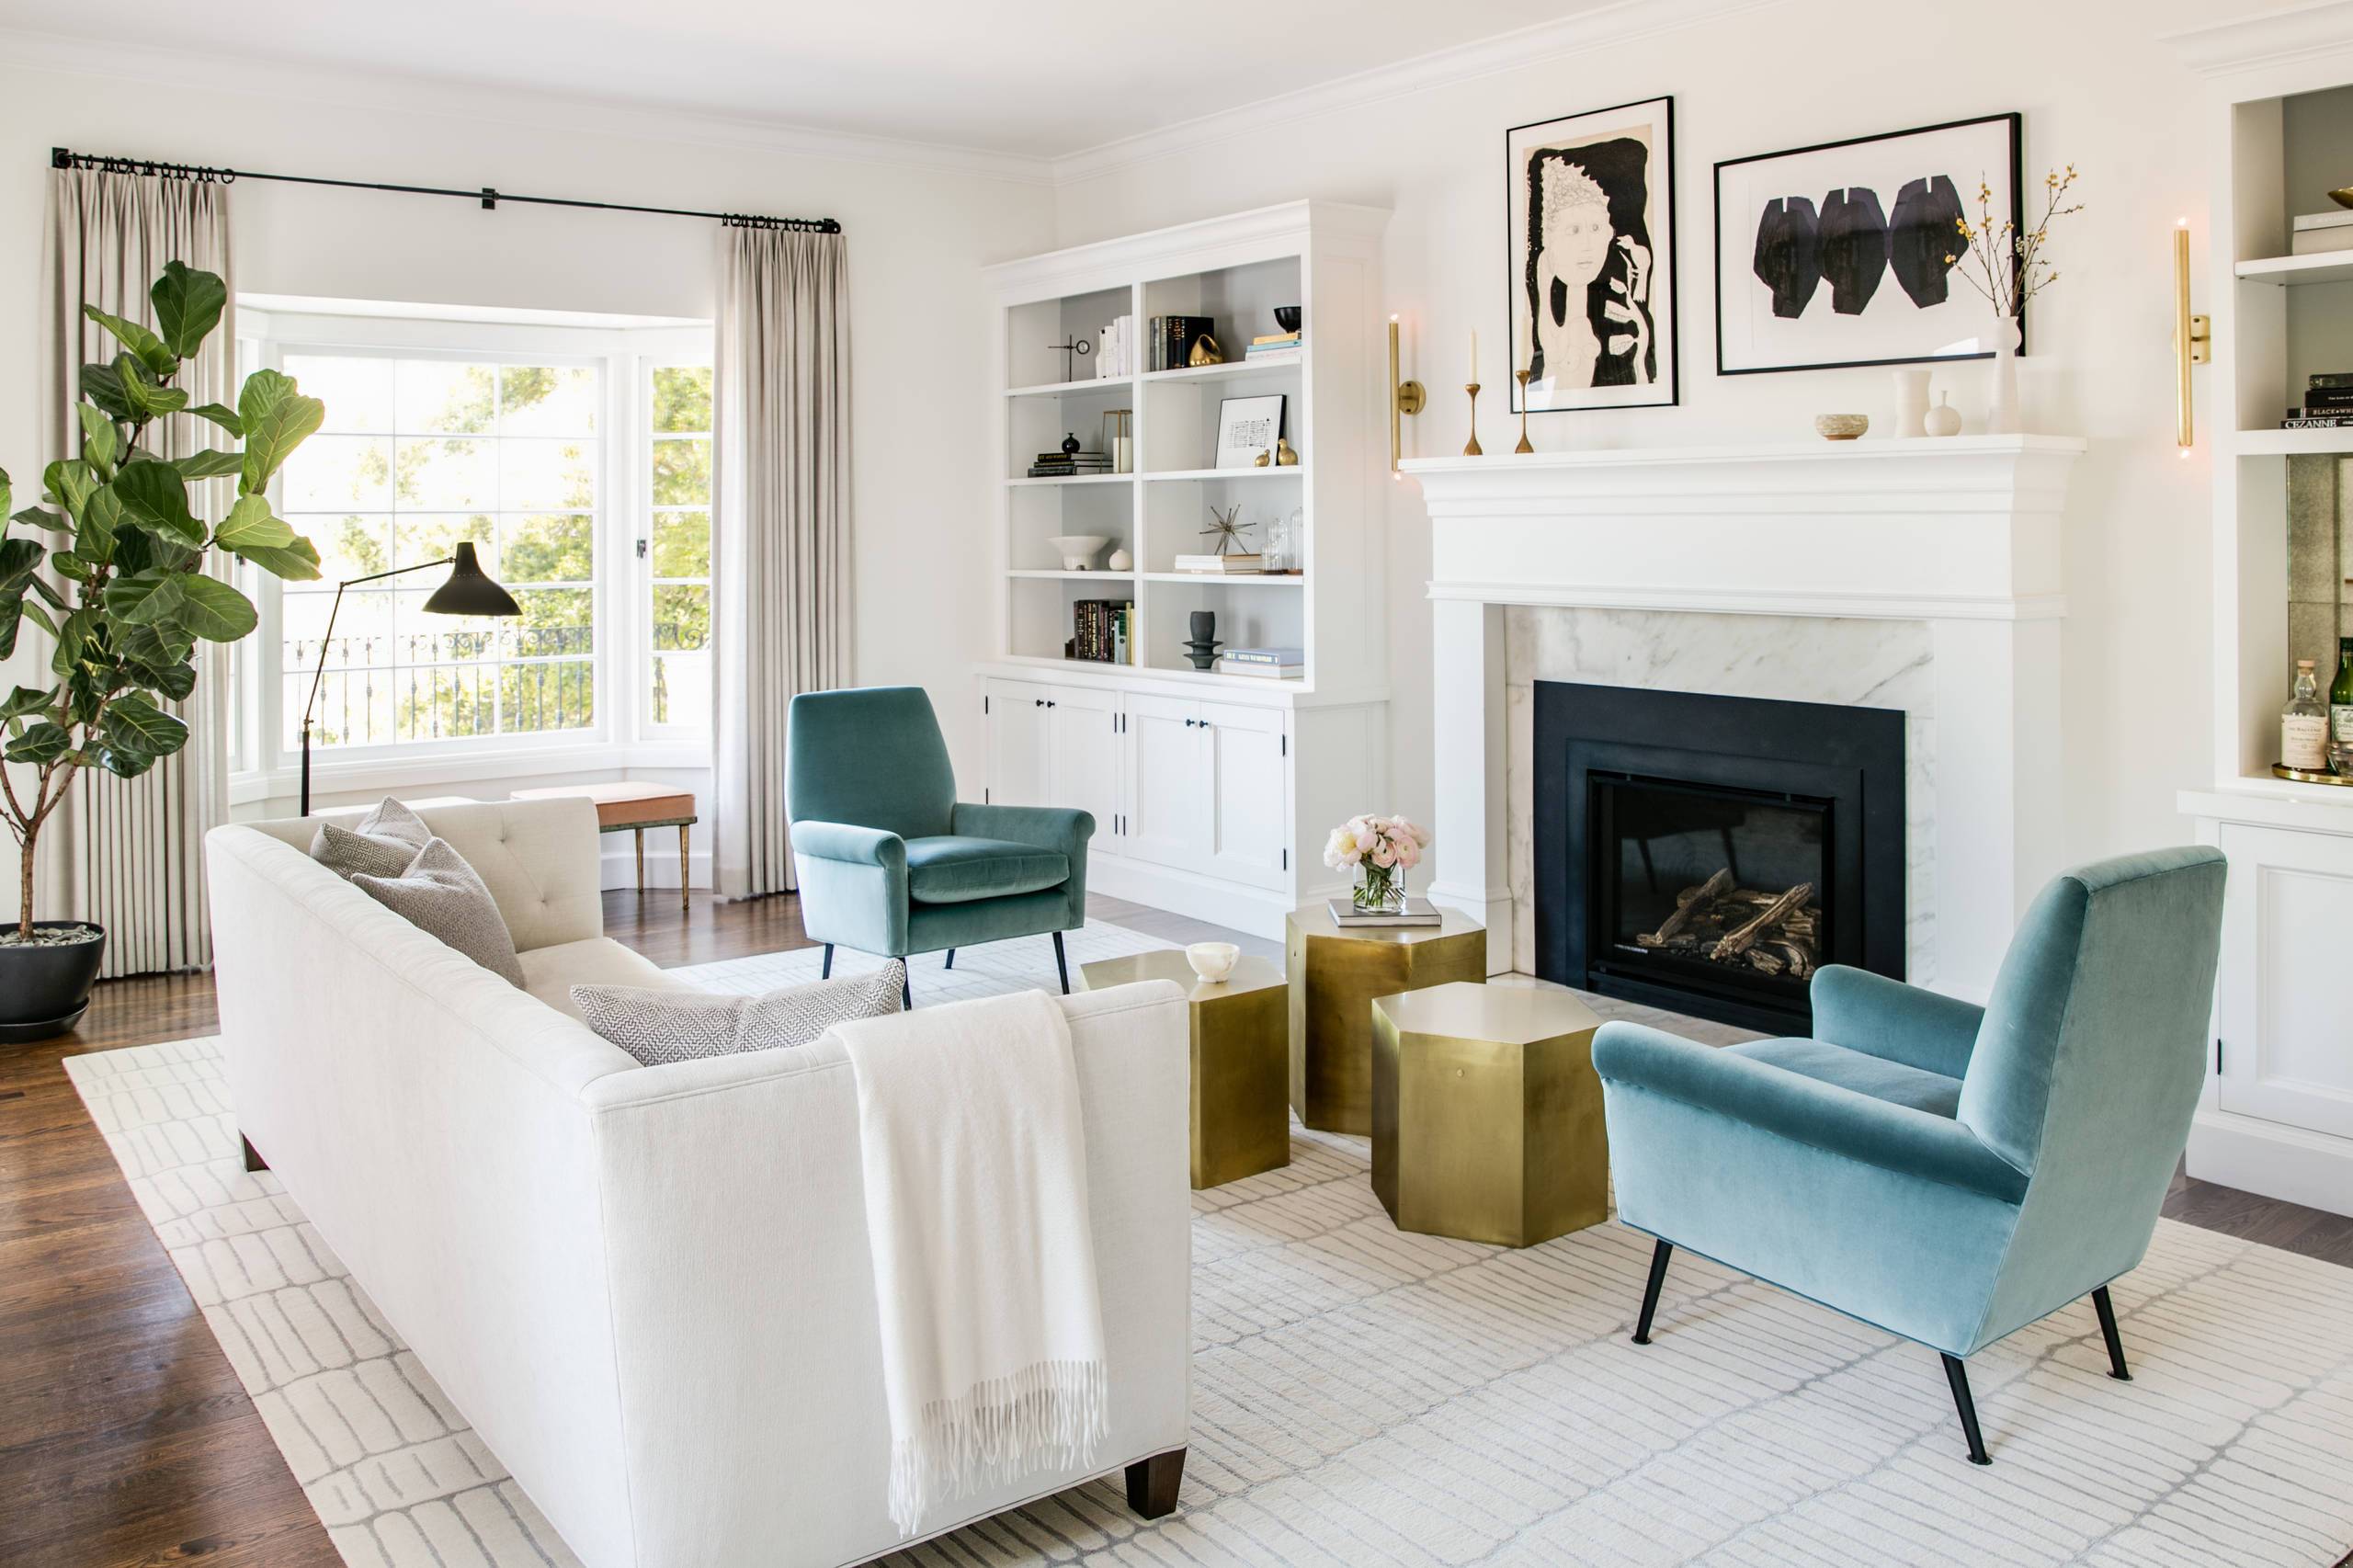 Light and airy traditional living room (from Houzz)